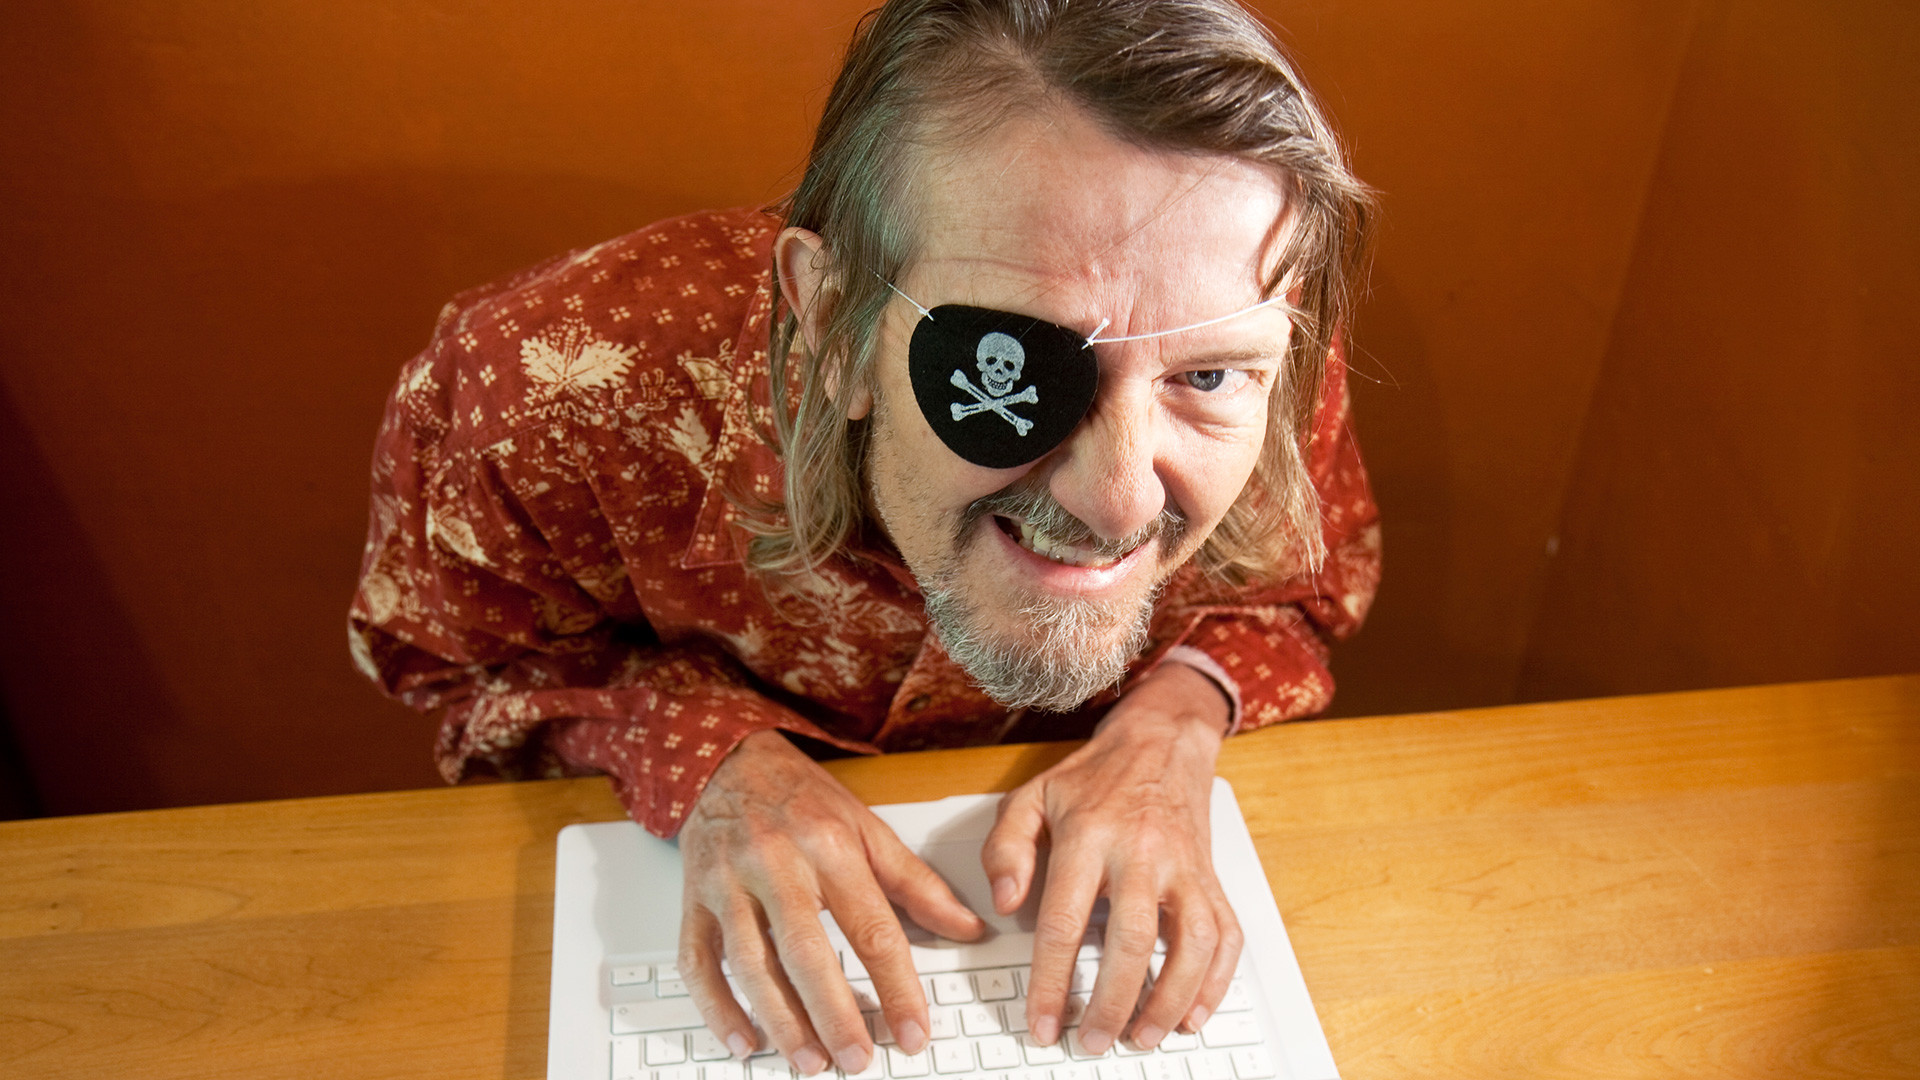 An unscrupulous pirate downloads content from a laptop computer